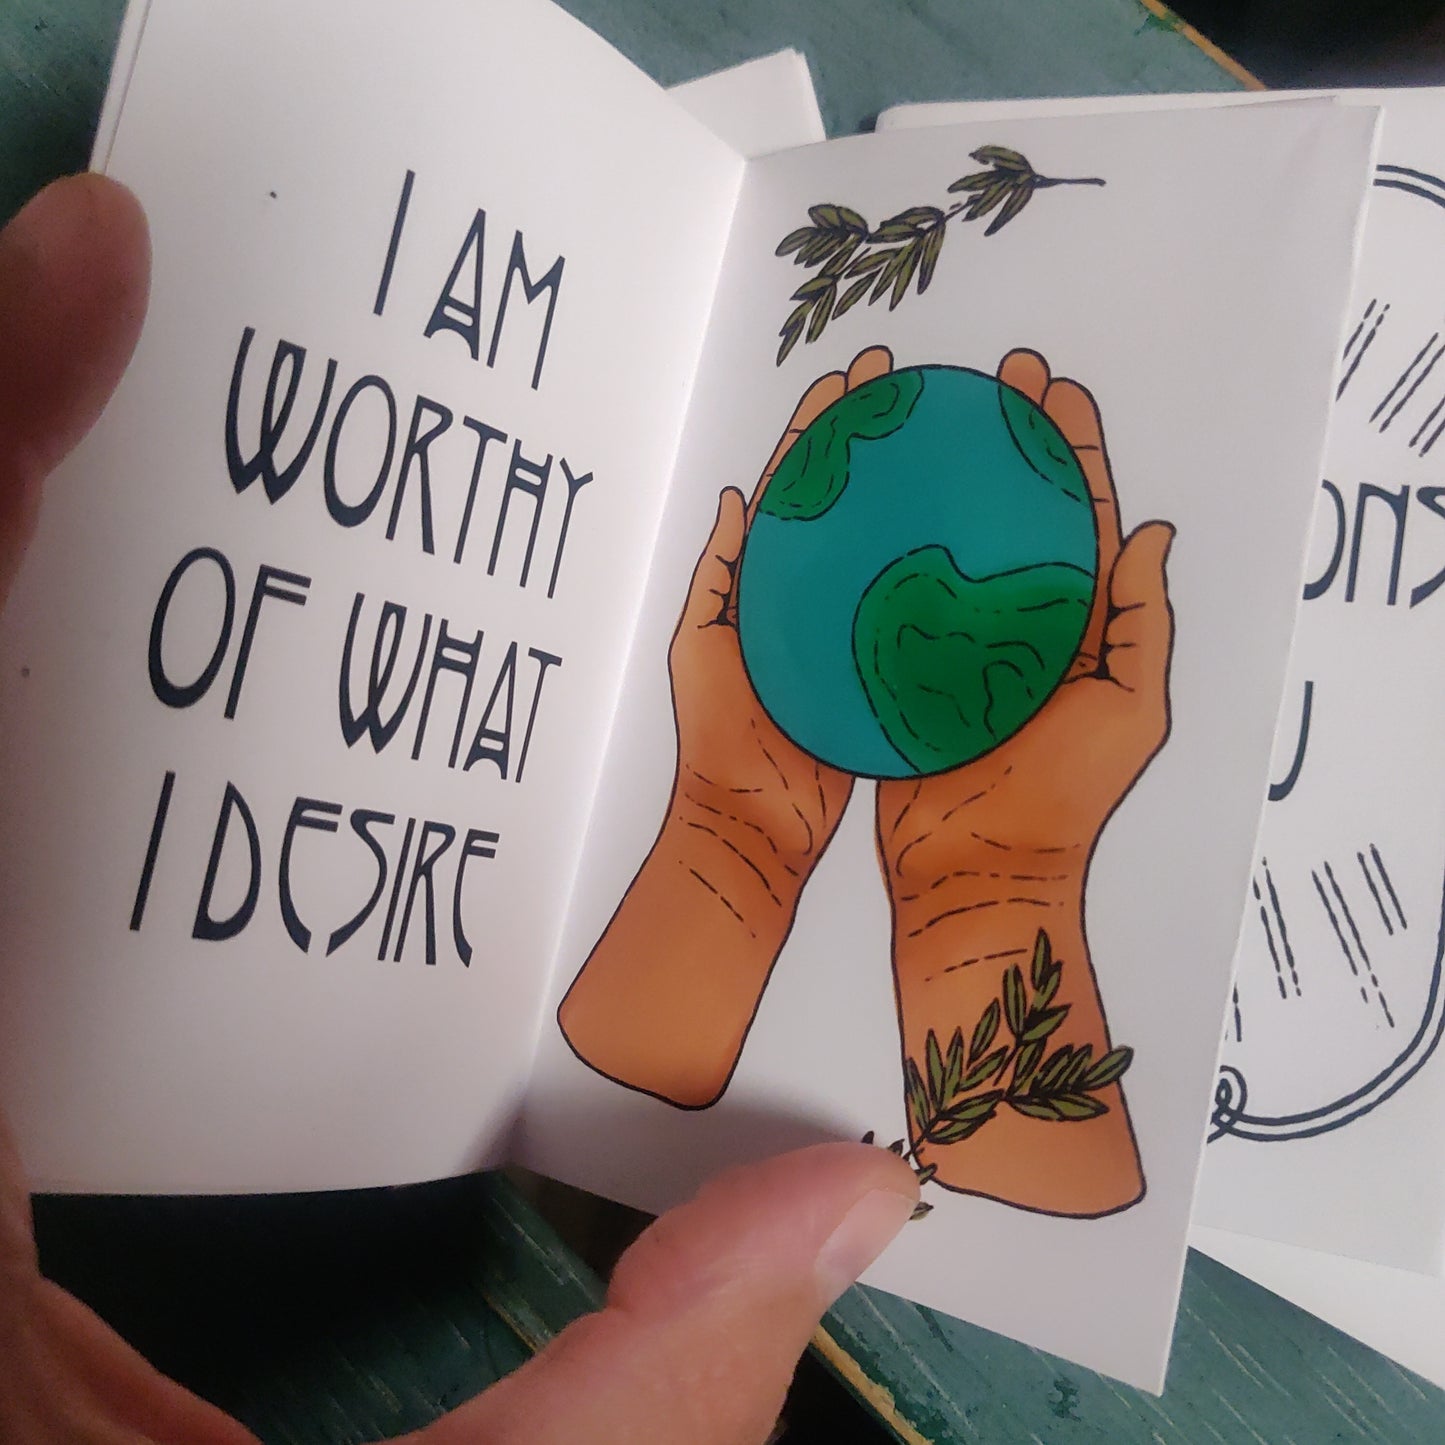 Affirmations For You Mini ZiNE